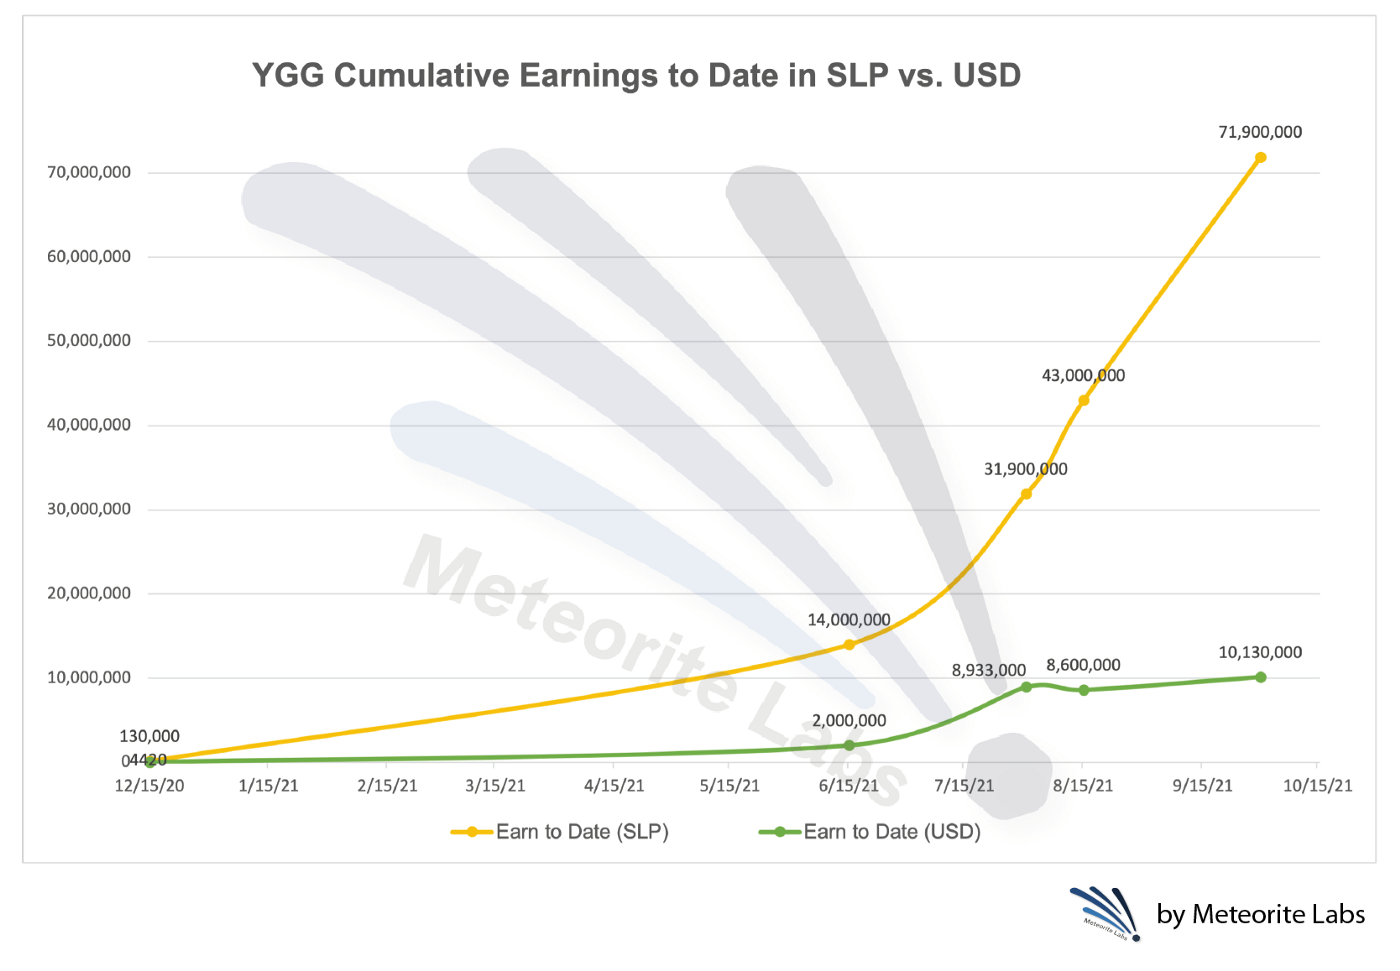 Figure 2. YGG’s Cumulative Earnings to Date Calculated in SLP (yellow line) and USD (green line). While SLP keeps increasing at an almost linear rate from late July, the earnings measured by USD seem to have hit a bottleneck.